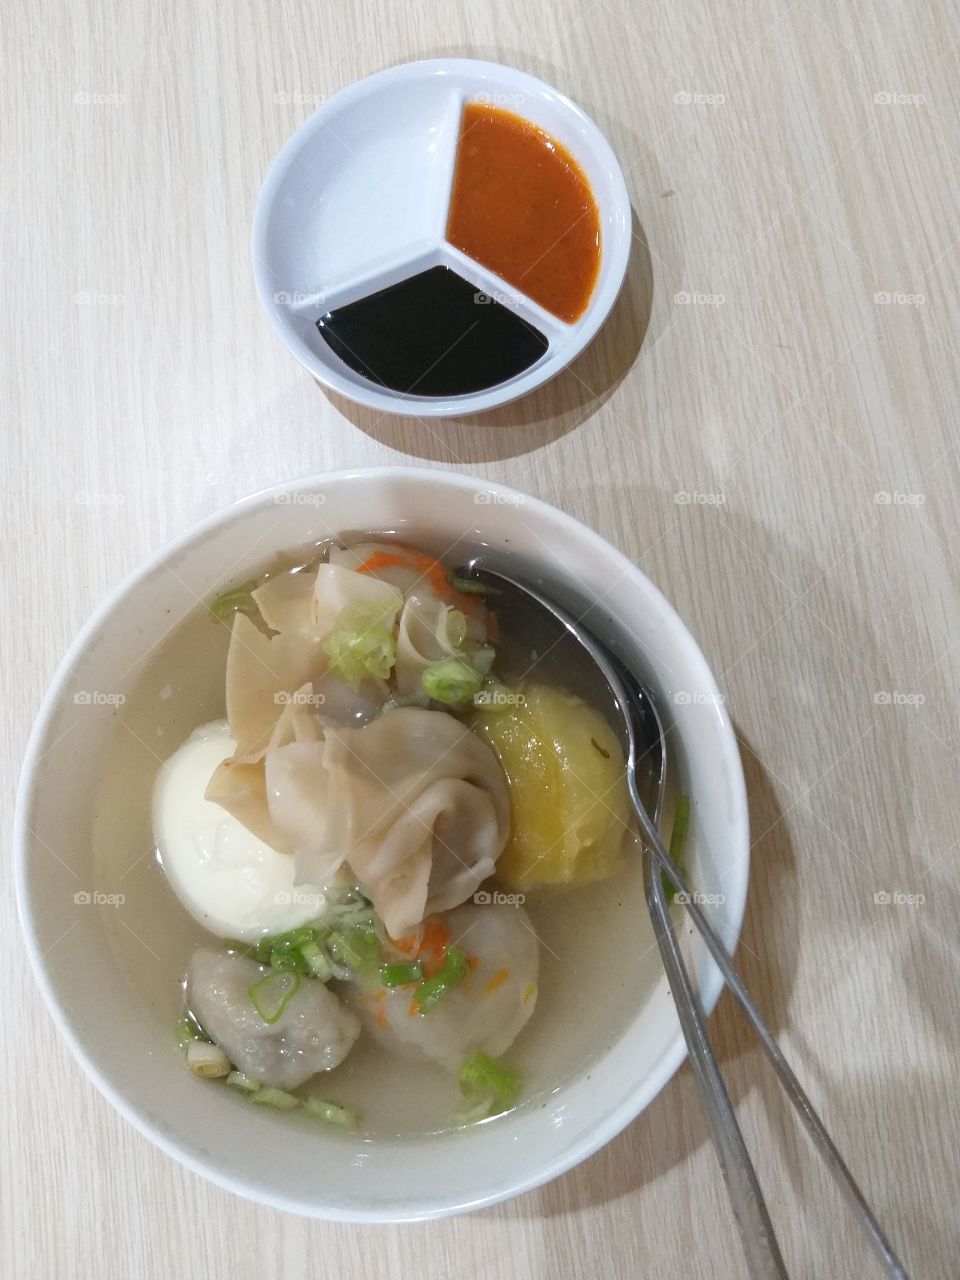 Ussually if you eat dumplings just with nut sauce, here you can eat siomay soup. The soup really delicious, better you eat in cold weather. The soup has a strong taste of pepper.